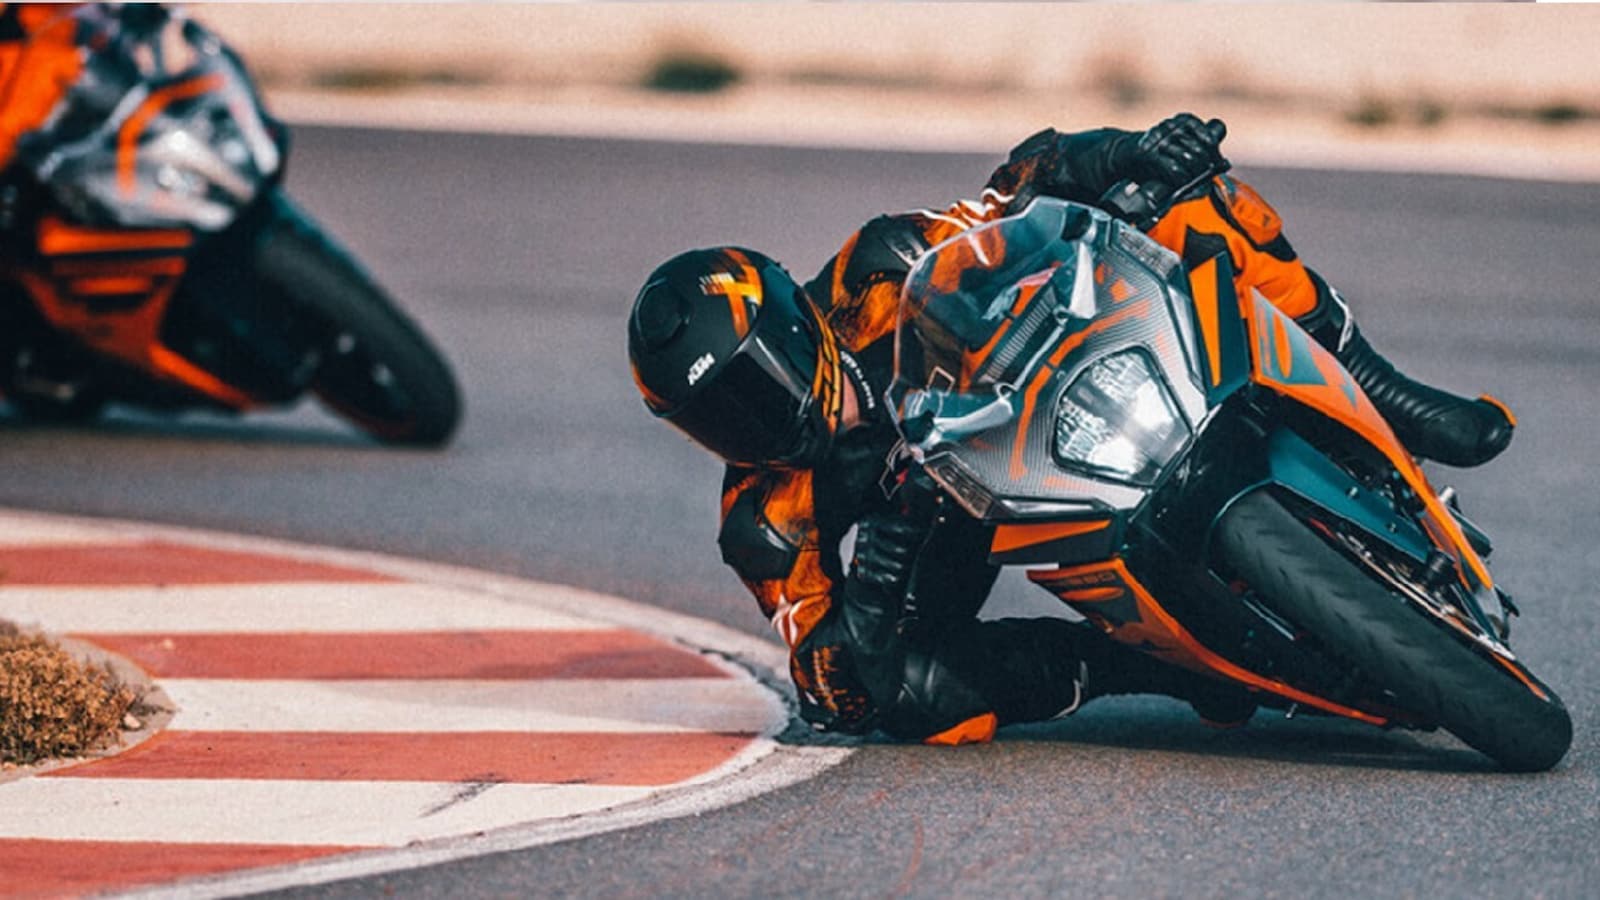 2023 Ktm Rc390 Review | The One For The Road, And The Race Track As Well